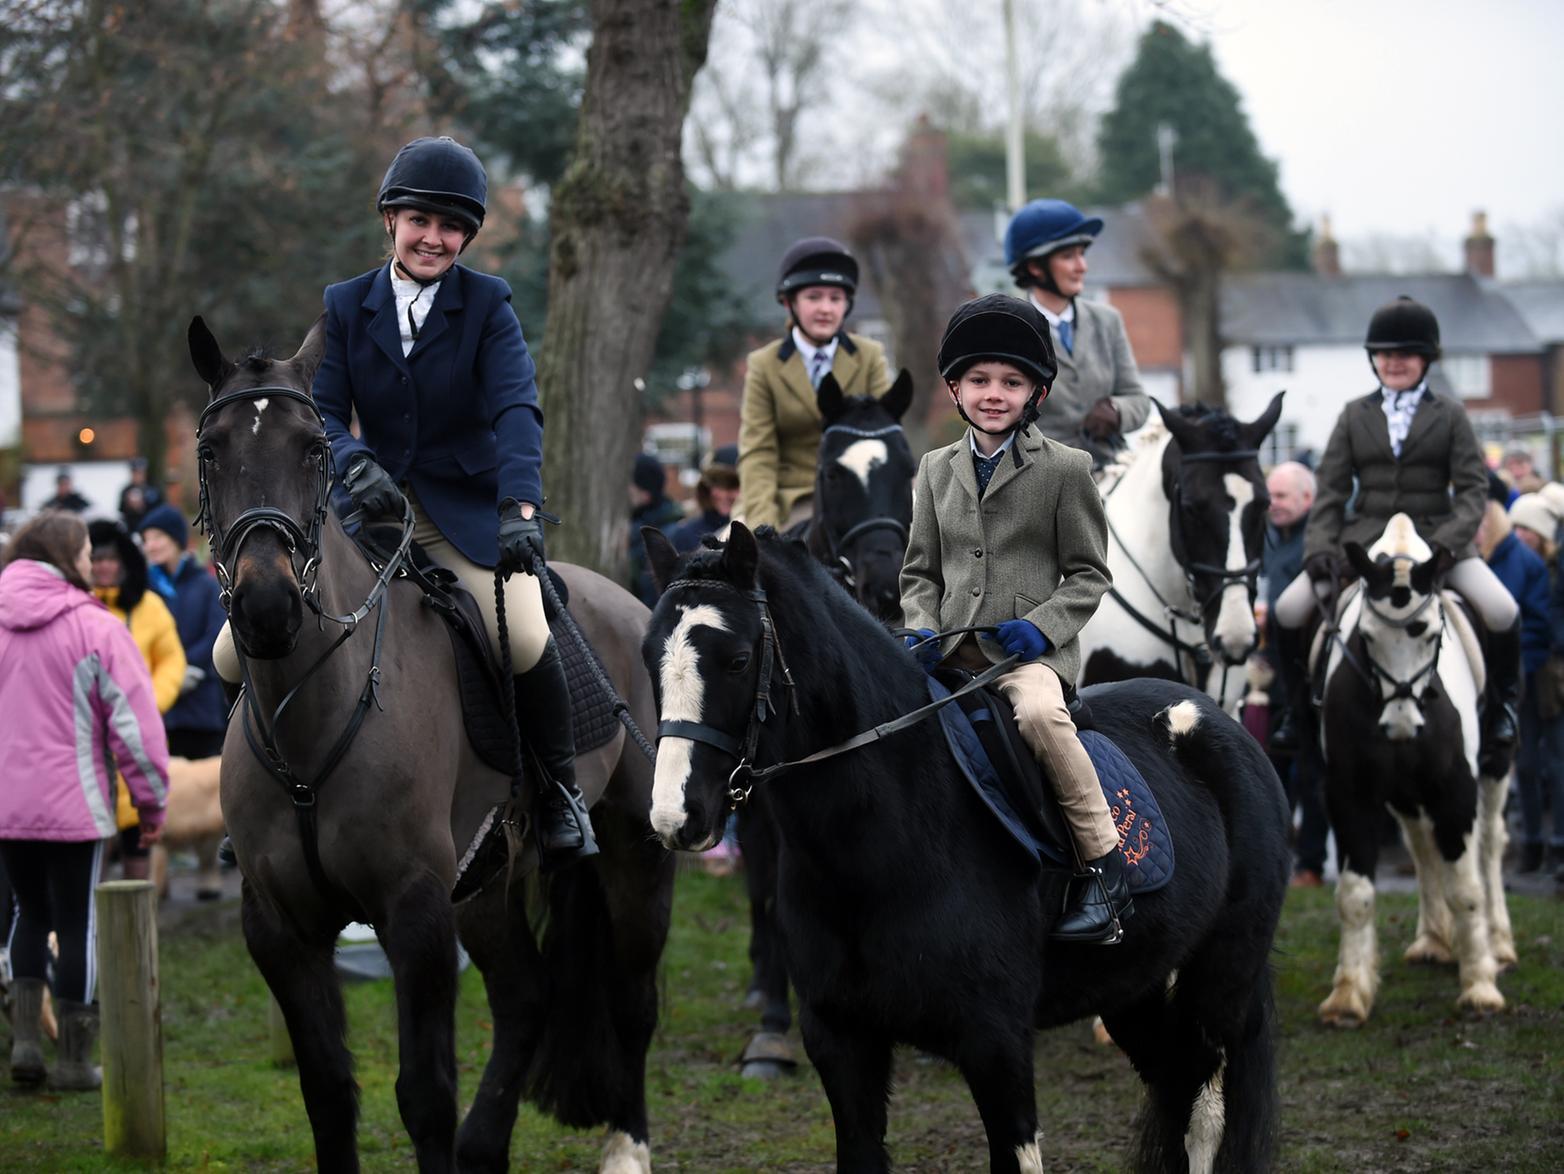 Riders meet on the Green during the Boxing Day Hunt meet.